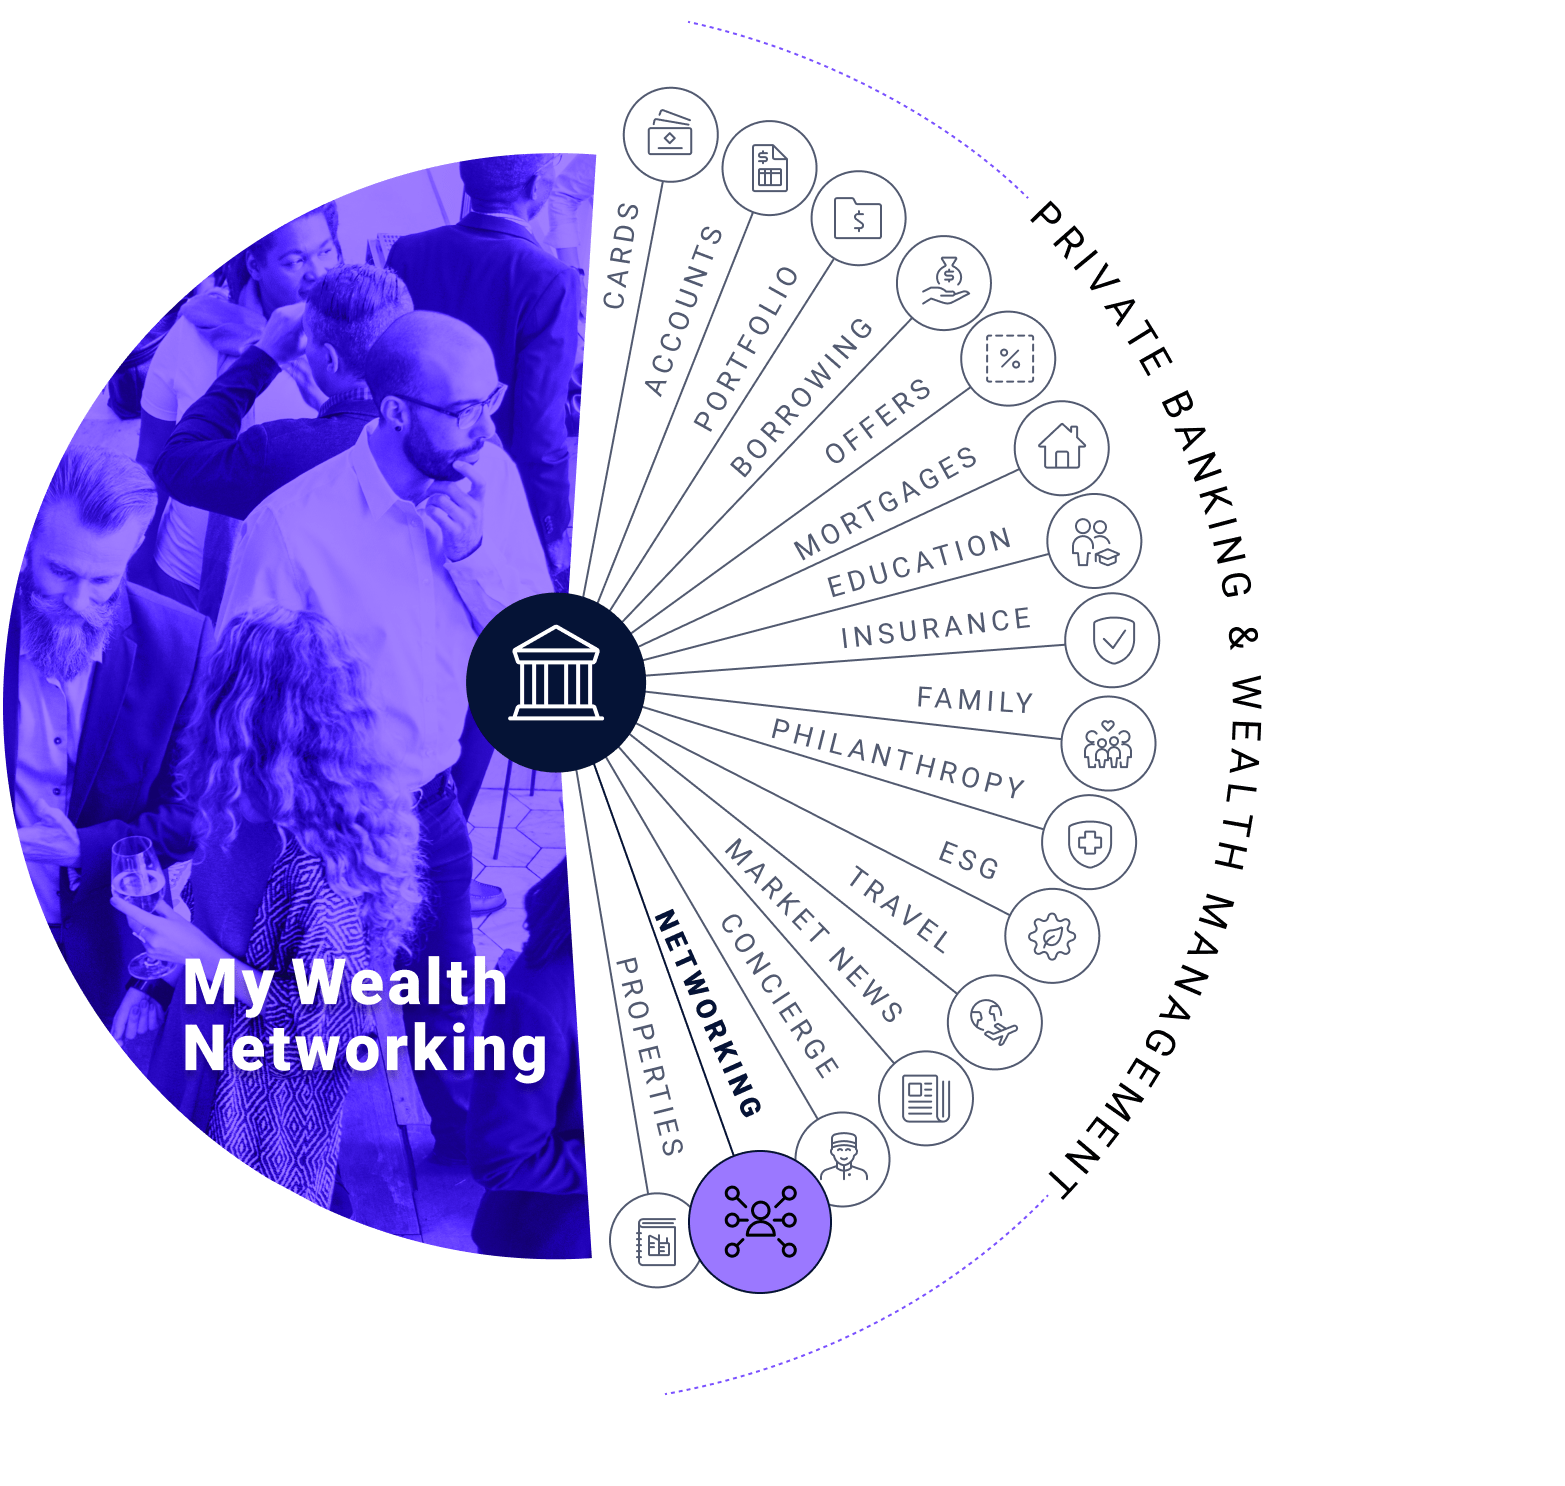 My Wealth Networking: cards, accounts, portfolio, borrowing, offers, mortgages, education, insurance, family, philanthropy, esg, travel, market news, concierge, networking, and properties